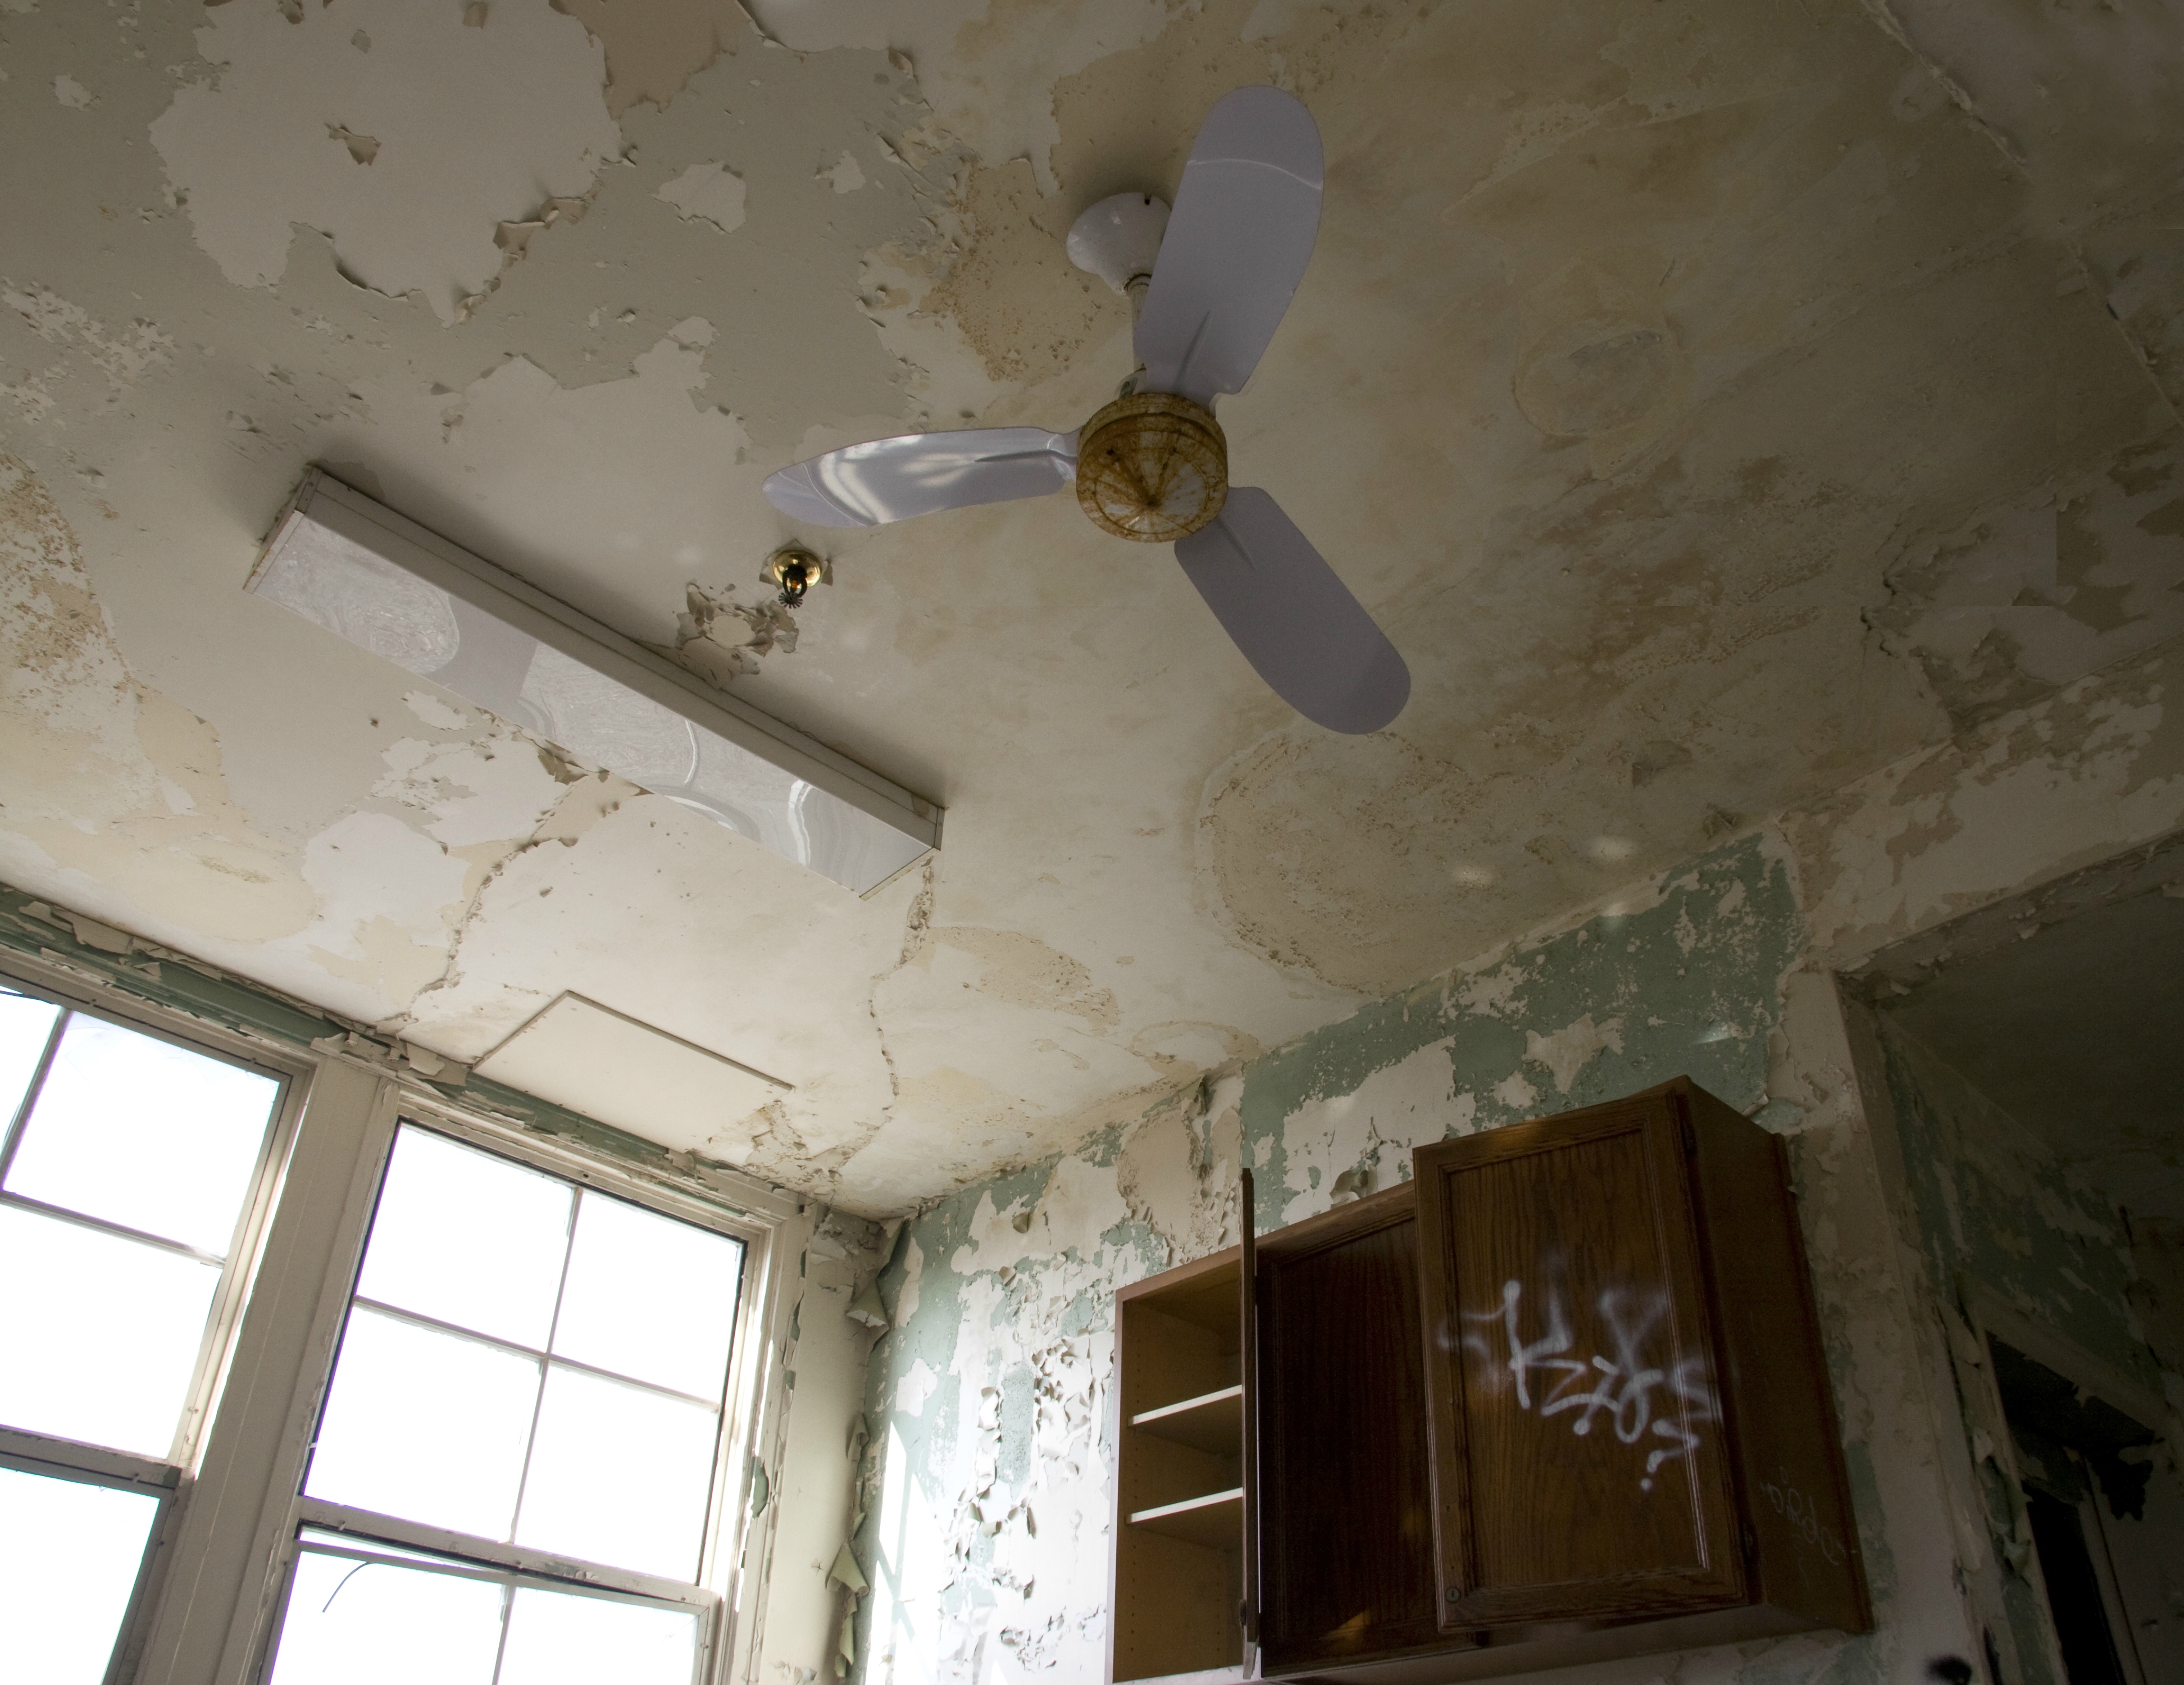 CEILING FAN - remnants of objects that remind us that this place was once used everyday.